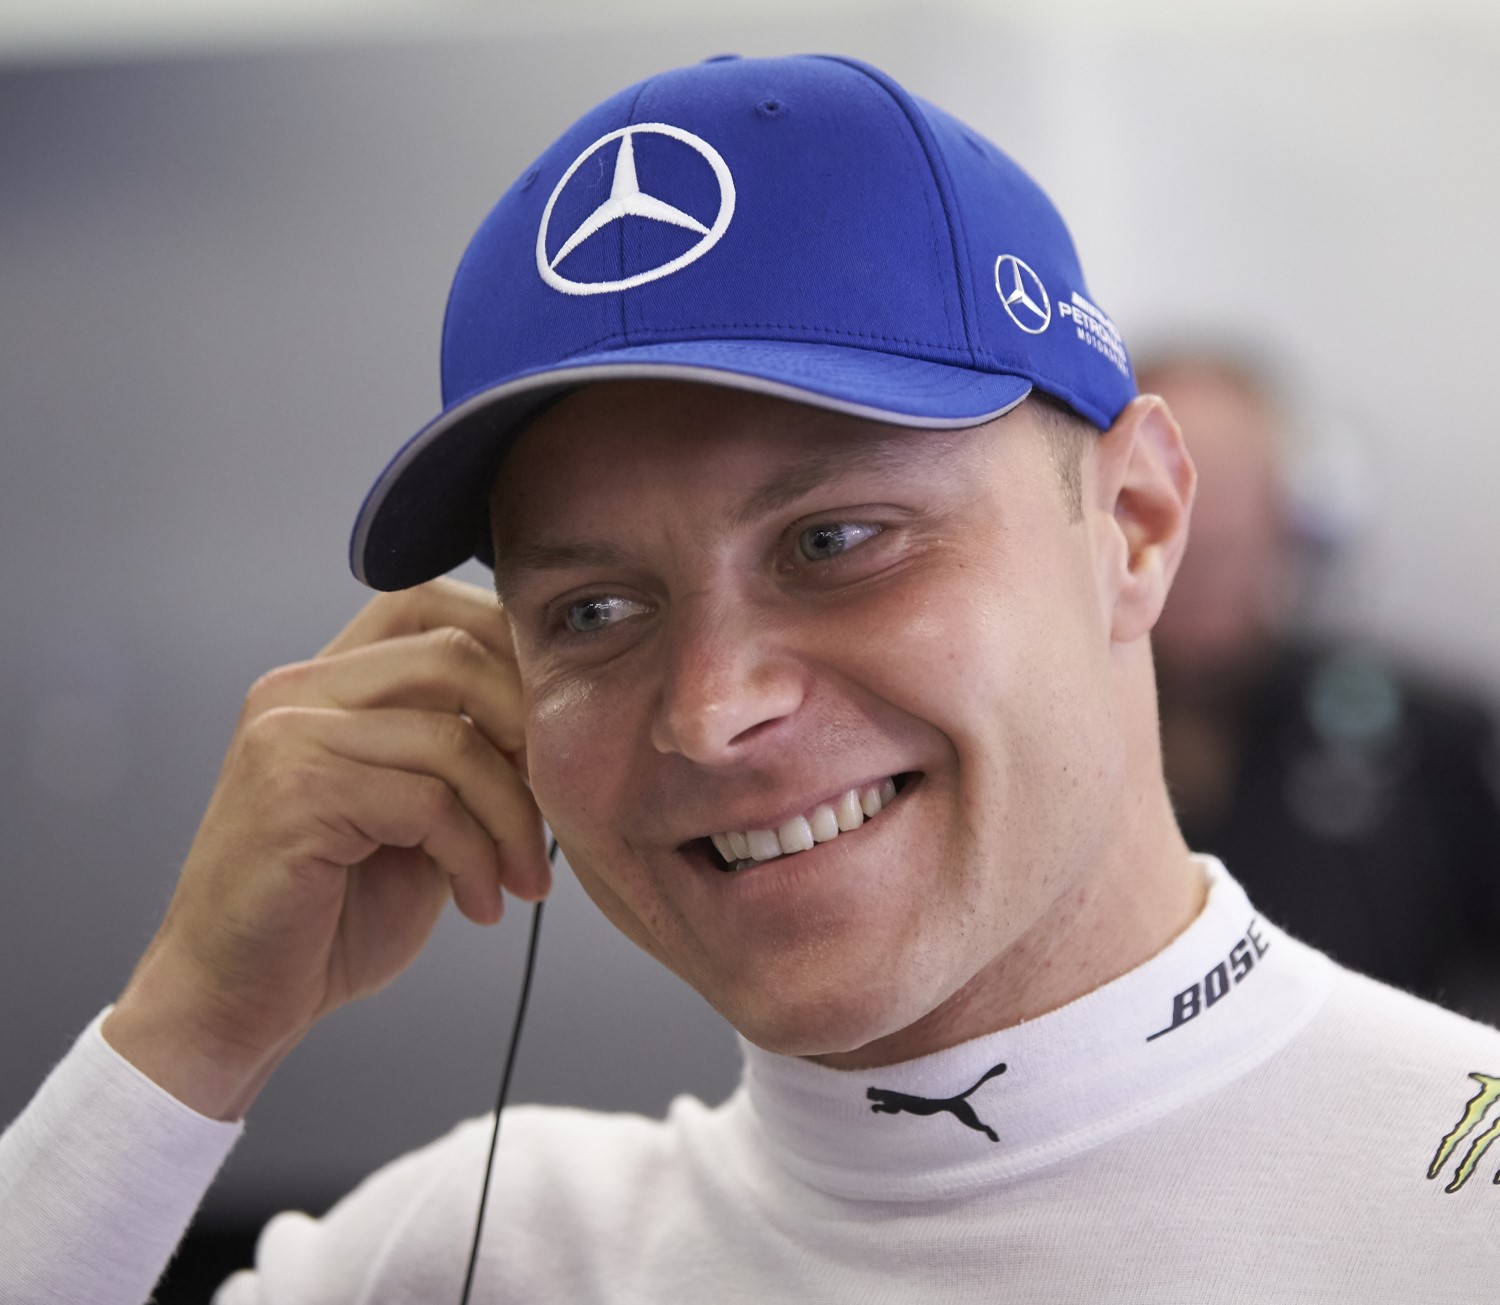 Bottas knows he will be at Mercedes again in 2018